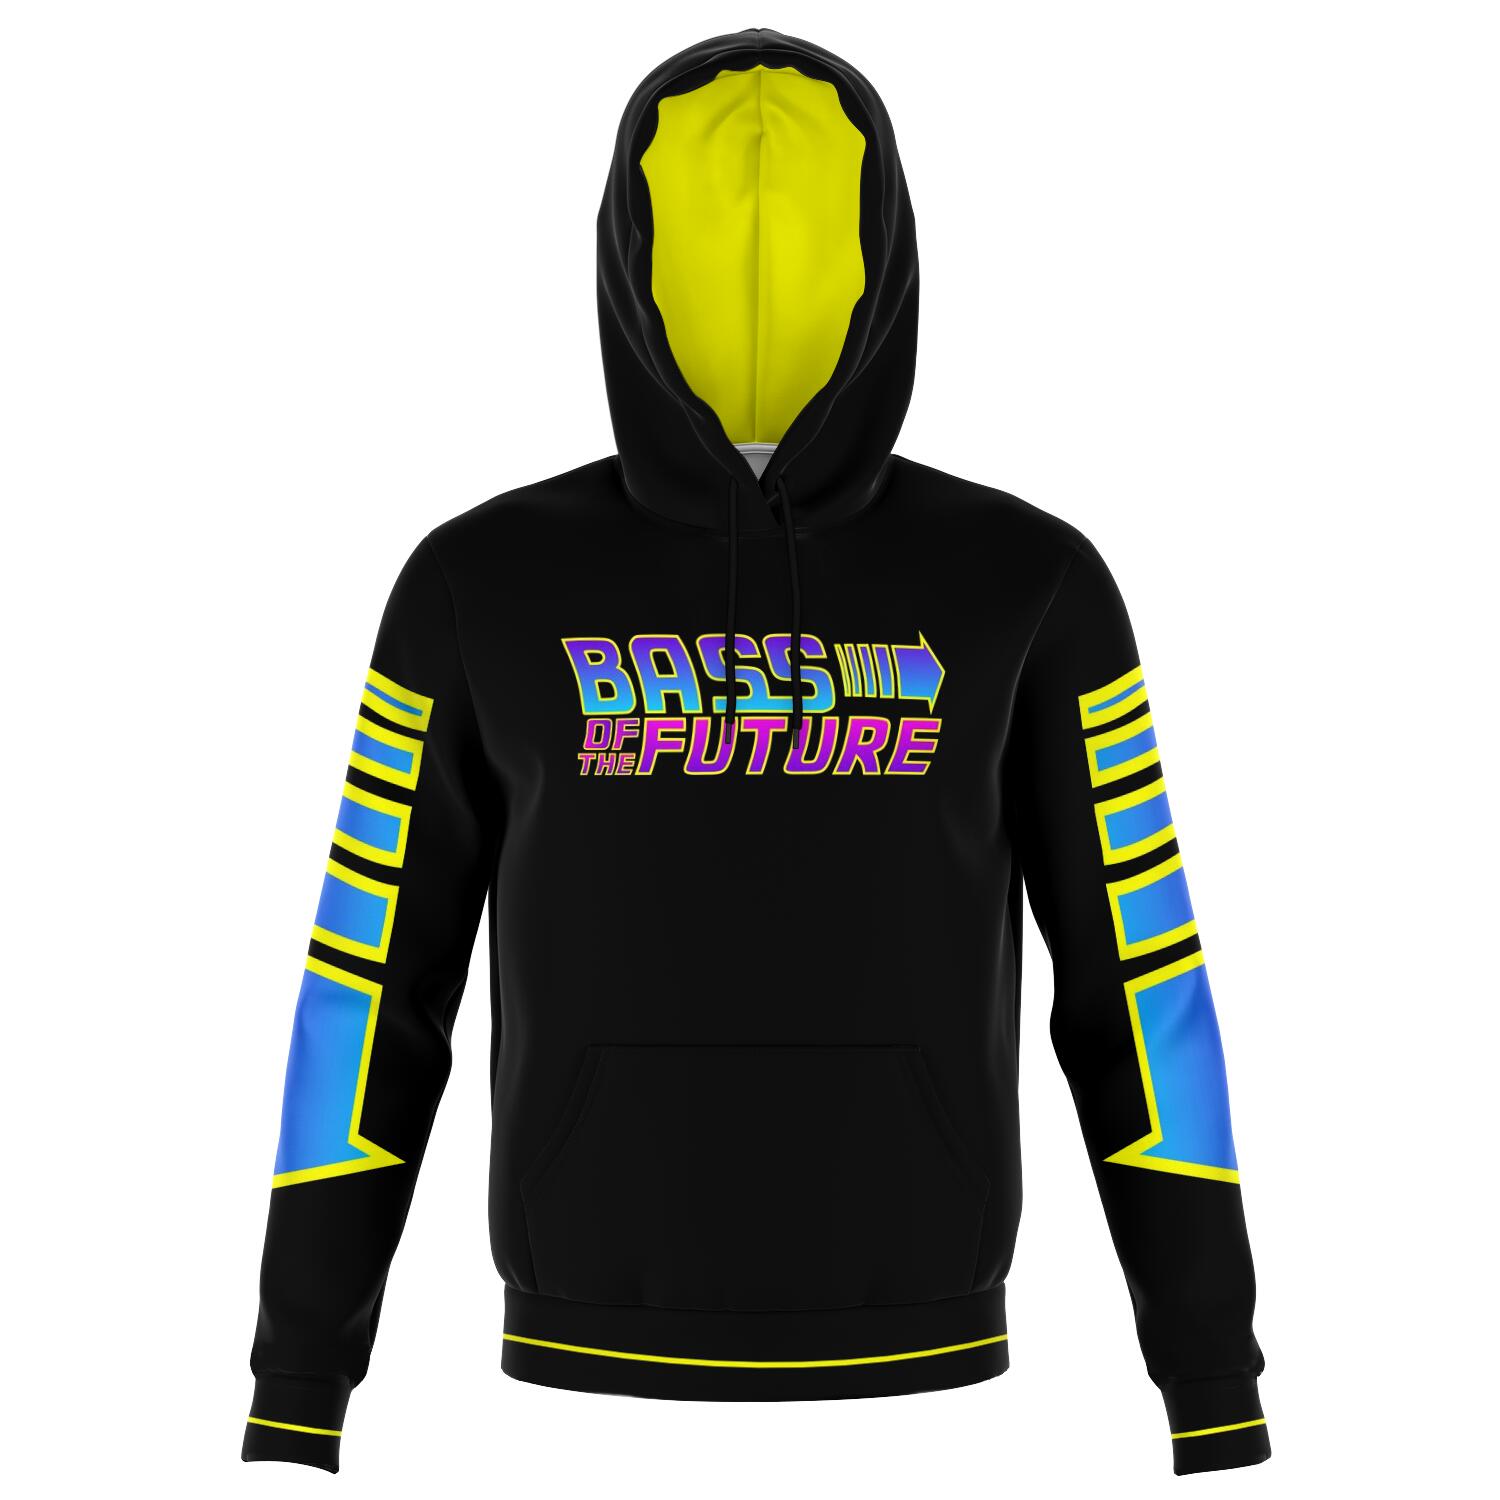 Bass of the Future Hoodie